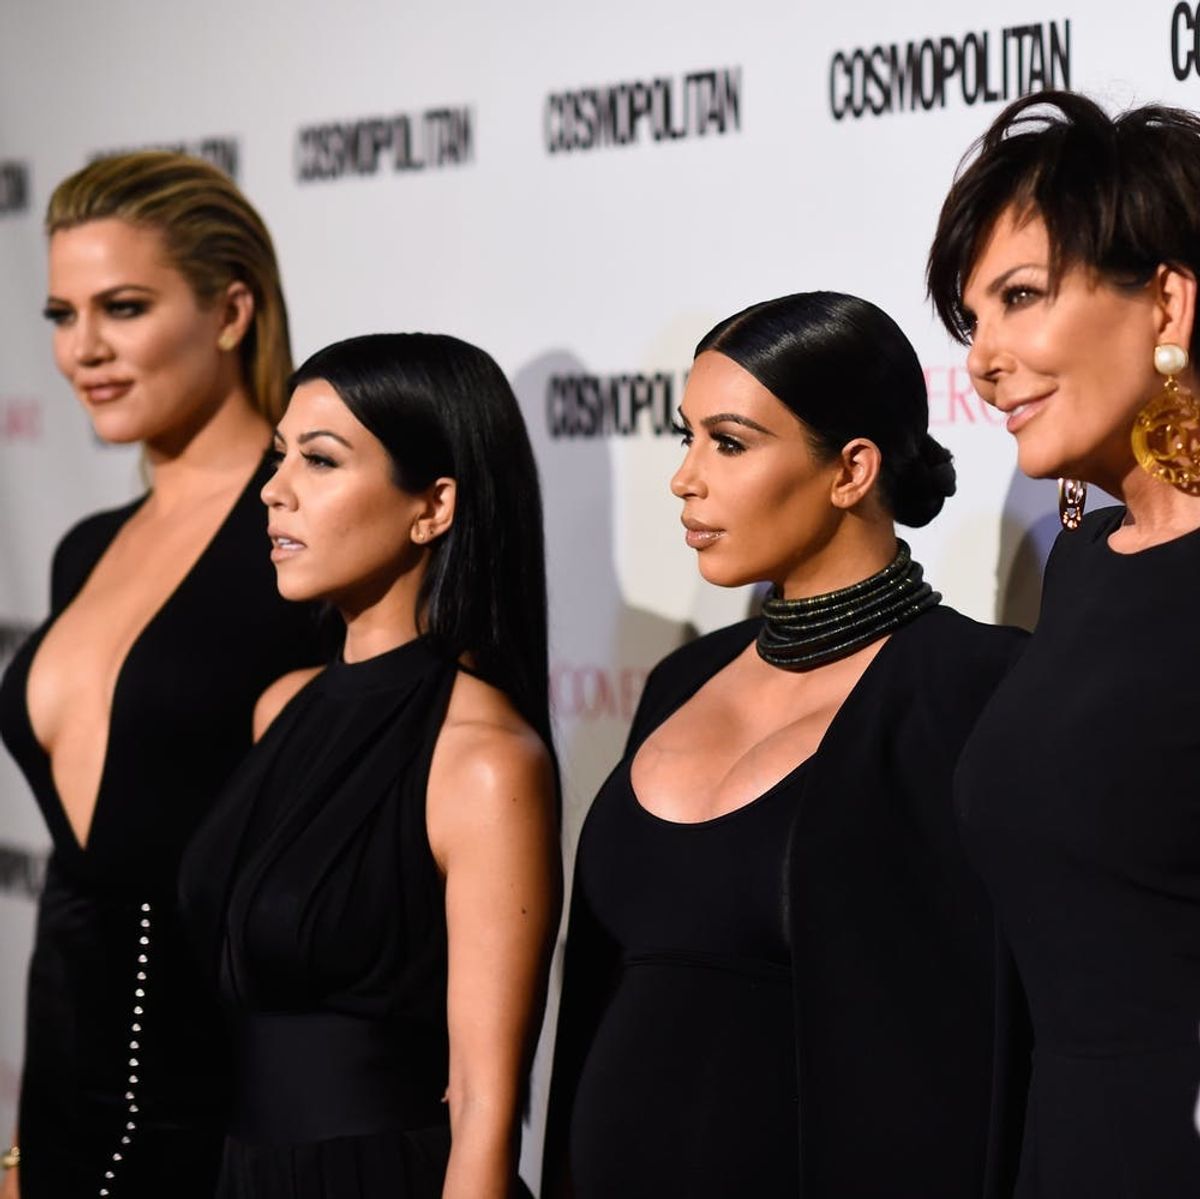 The Kardashians Just Signed a Massive Deal With E! for More “KUWTK”